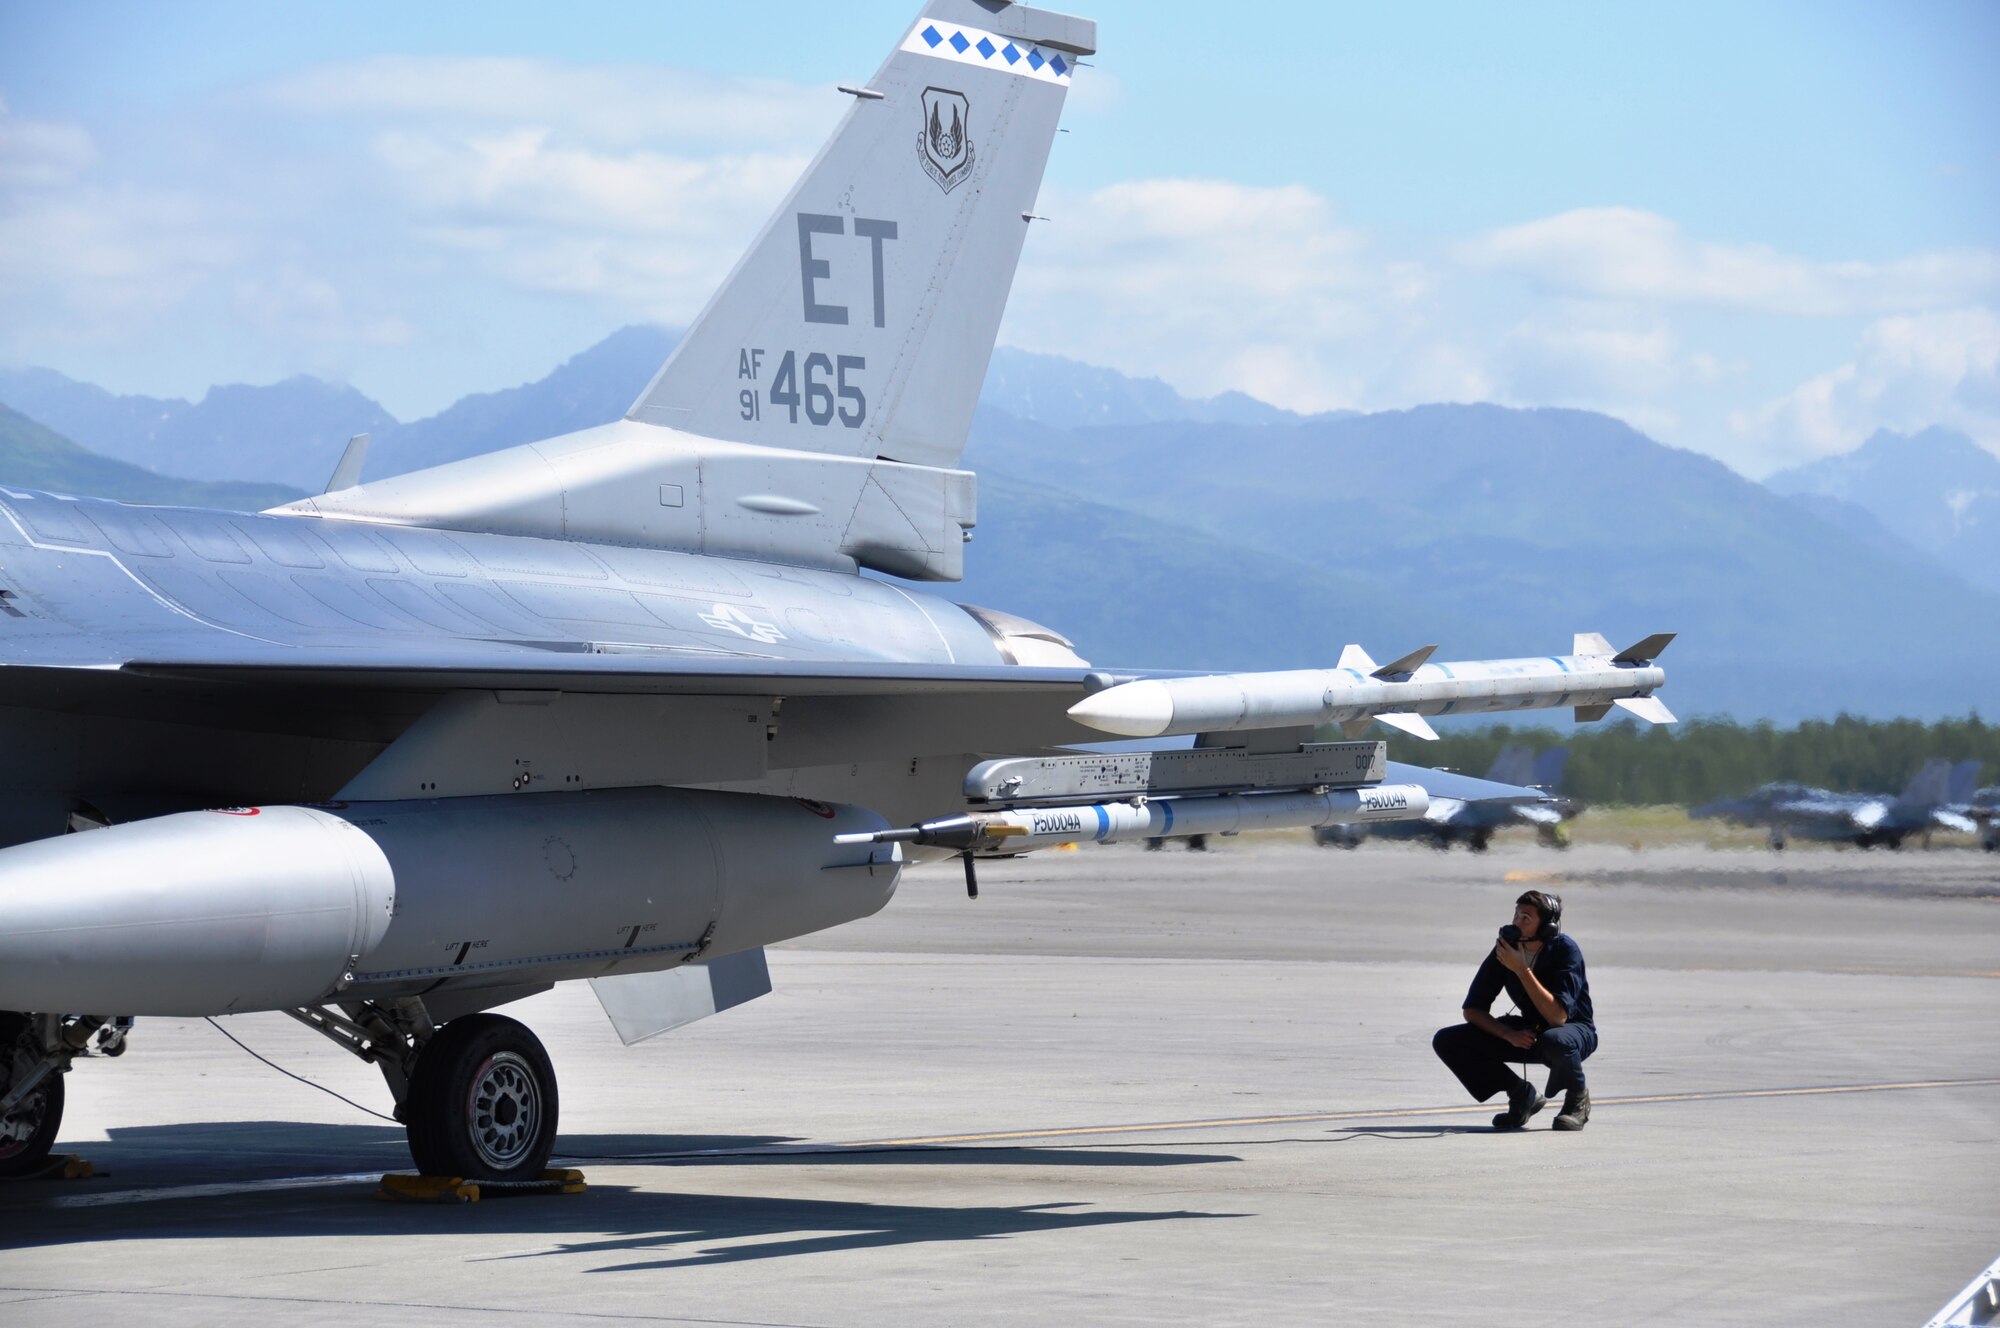 U.S. Air Force Senior Airman Jeremy Fogle, 96th Aircraft Maintenance Squadron F-16 crew chief from Nazareth, Pennsylvania, prepares his F-16 for launch for an Exercise Northern Edge mission, June 23, 2015, Joint Base Elmendorf-Richardson, Alaska. Northern Edge is Alaska’s premier joint training exercise designed to practice operations, techniques and procedures as well as enhance interoperability among the services. Thousands of service members from active duty, Reserve and National Guard units are involved. (U.S. Air Force photo by Capt.Tania Bryan/Released)
